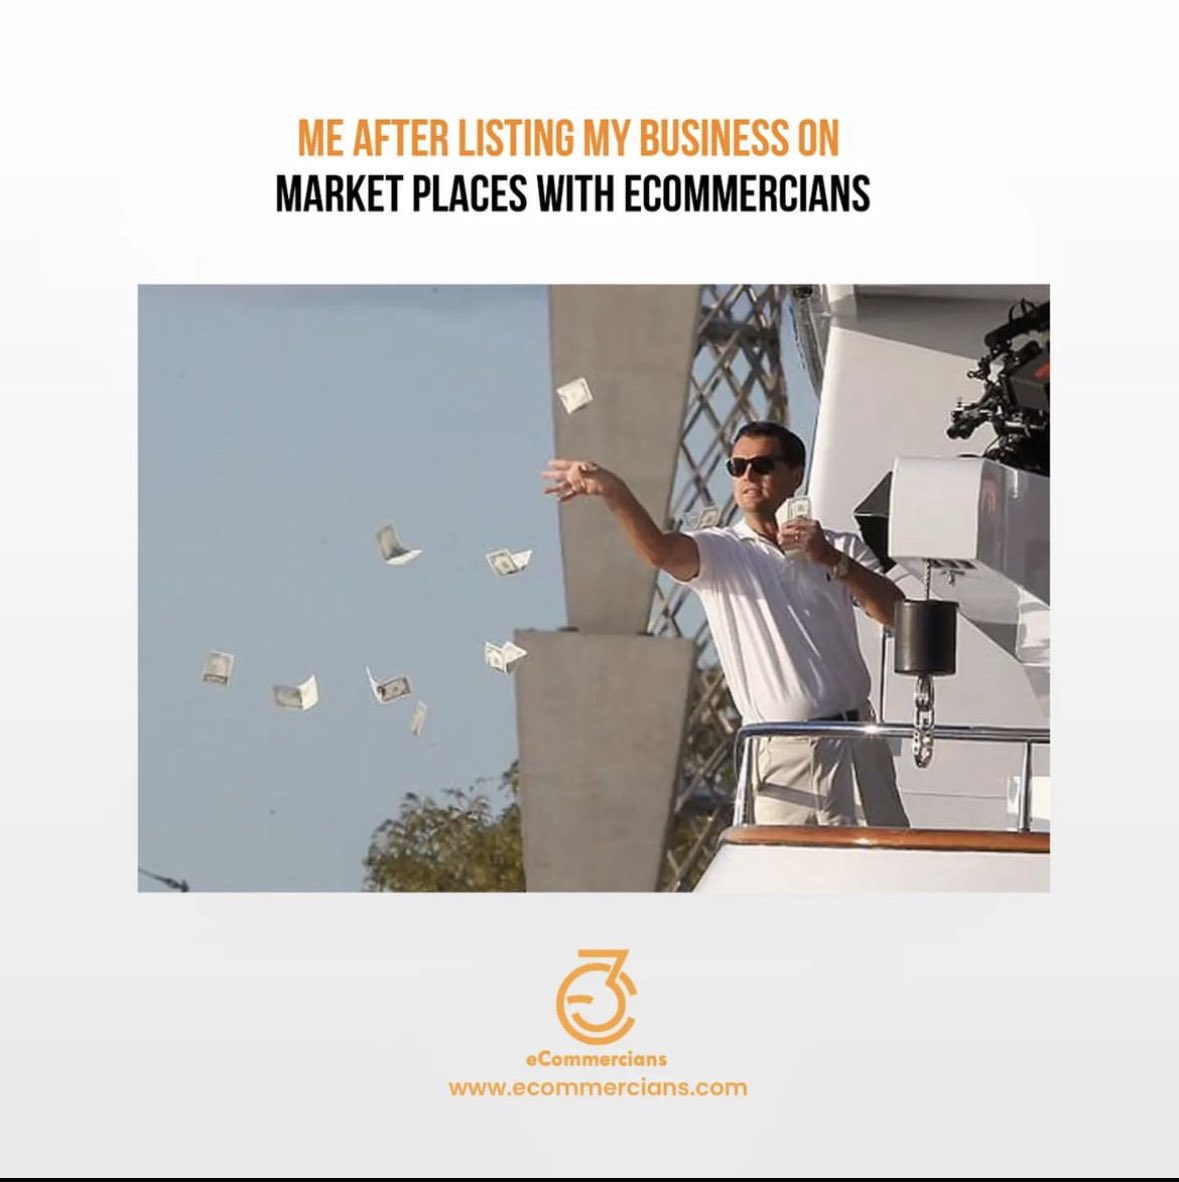 List your Brand on marketplaces with the help of Ecommercians ✅💲
.
💌 connect@ecommercians.com
📞 or WhatsApp on 8307565665 
.
#ecommercians #leonardodicaprio #thewolfofwallstreet #business #marketplace #amazon #flipkart #myntra #brandidentity #brandvisibility #ecommerce